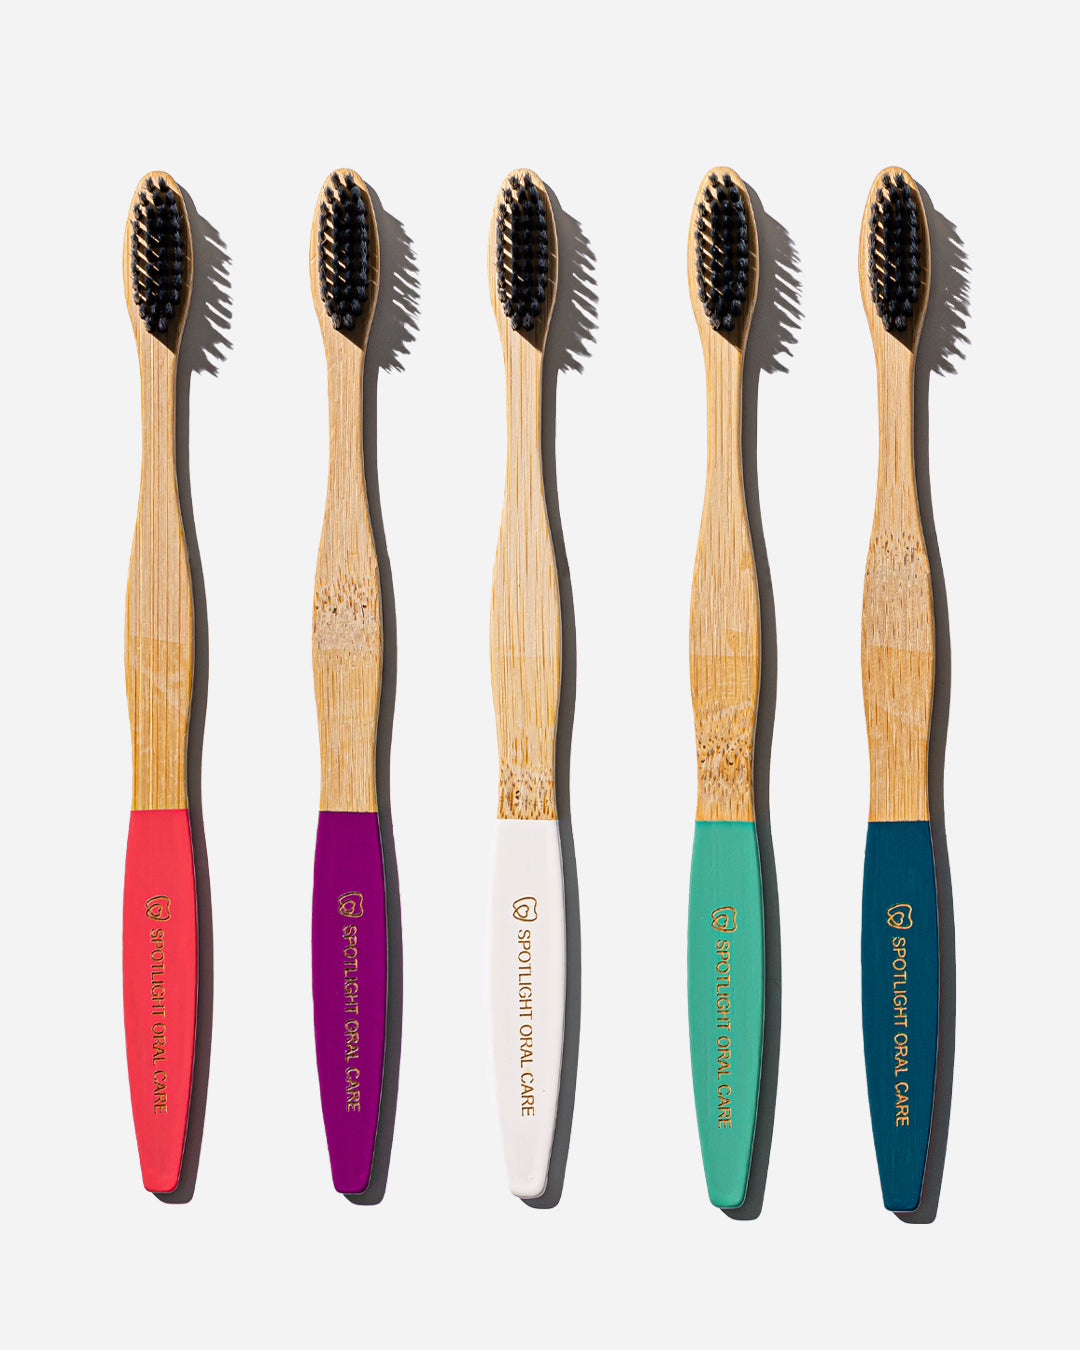 5-Pack Bamboo Toothbrushes